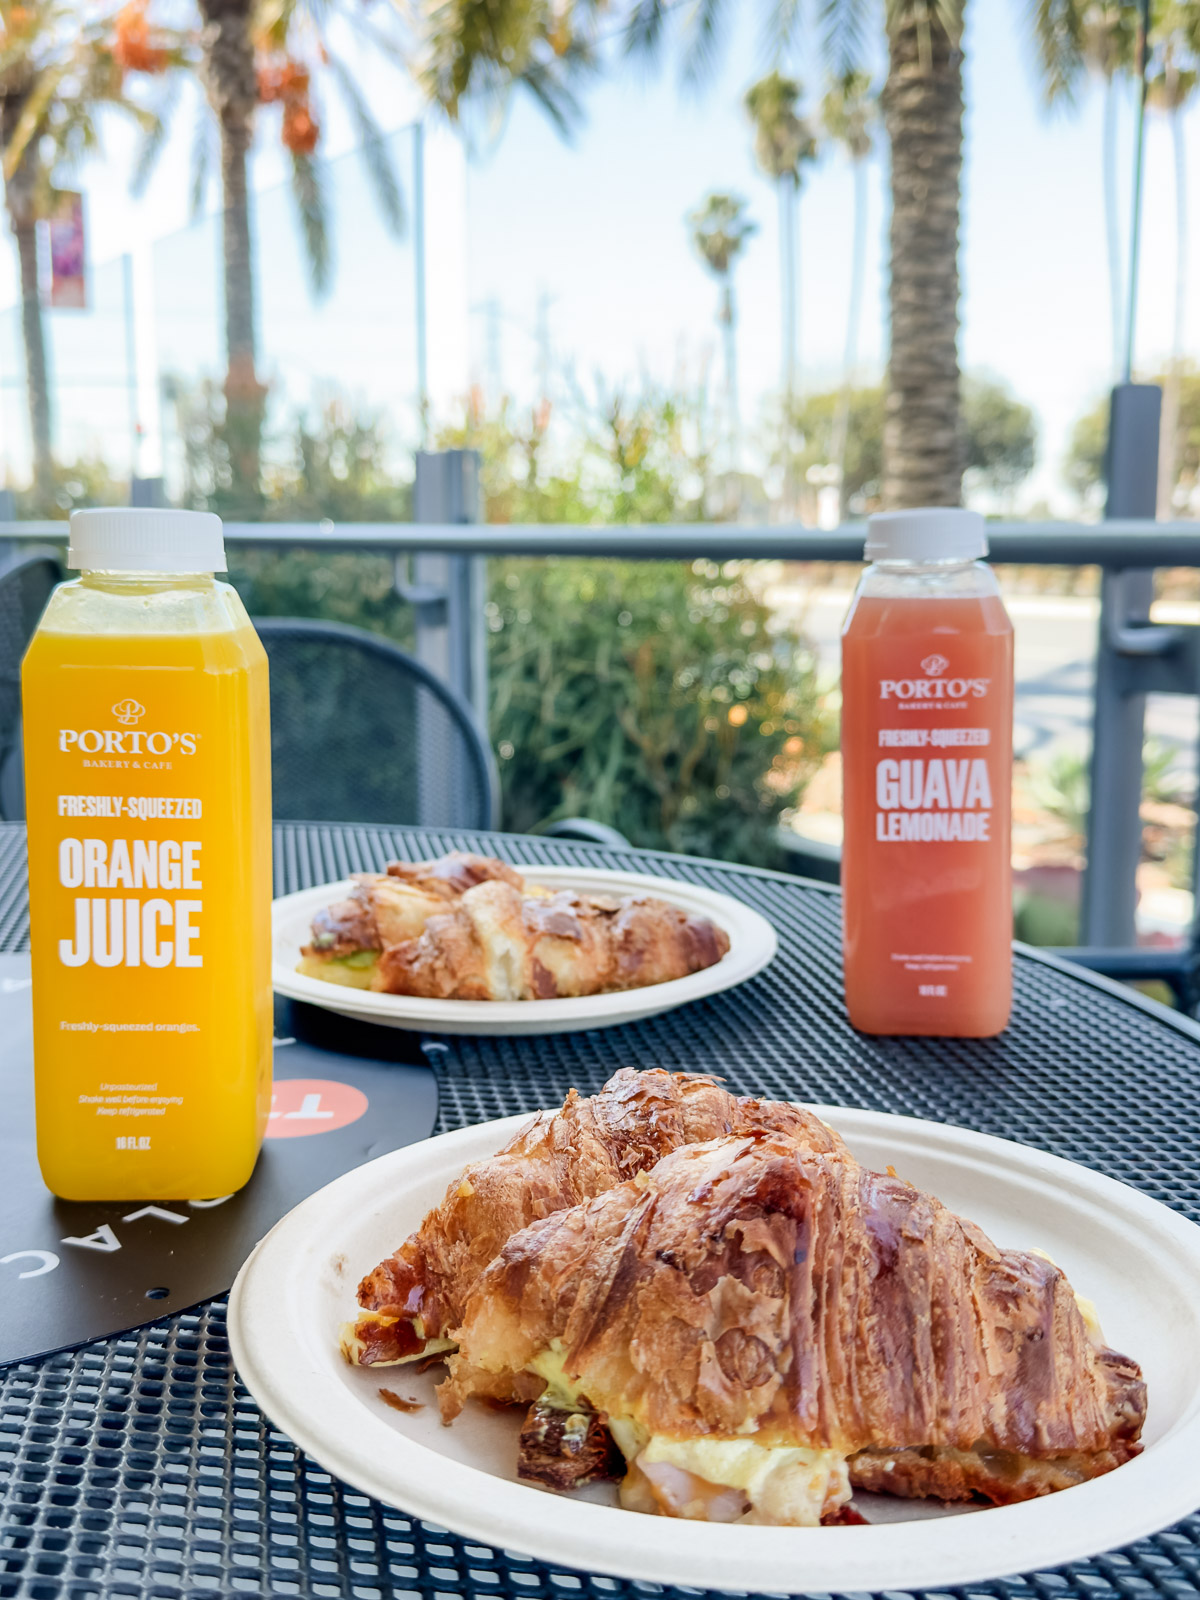 breakfast sandwiches and juice from portos bakery in buena park ca